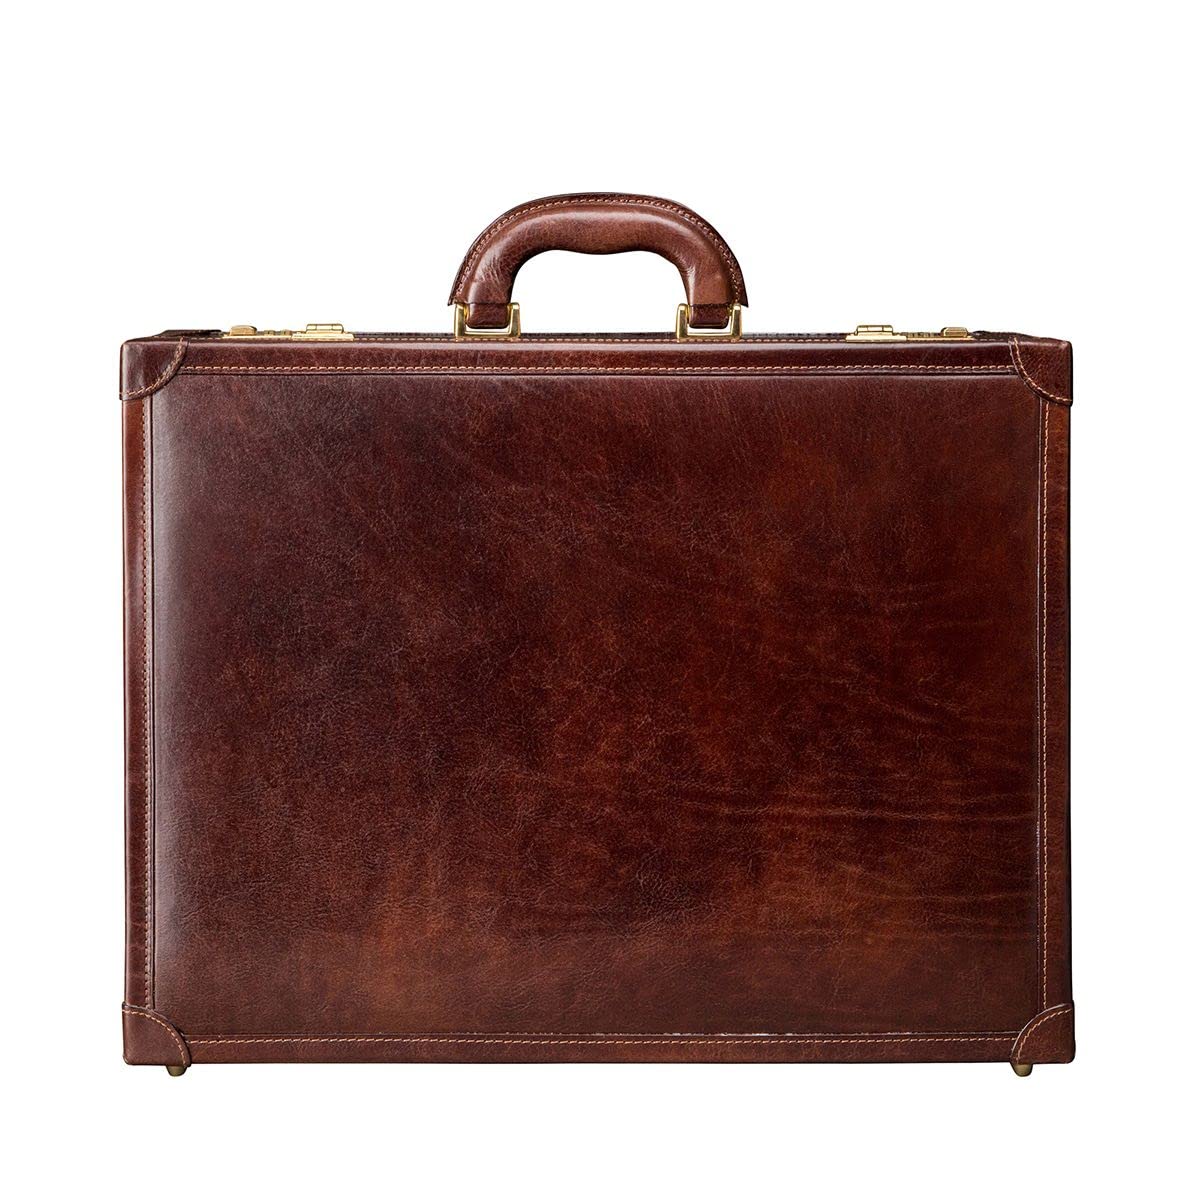 Maxwell Scott | Mens Quality Leather Large Attaché Briefcase | The Buroni | Handmade In Italy | Dark Chocolate Brown